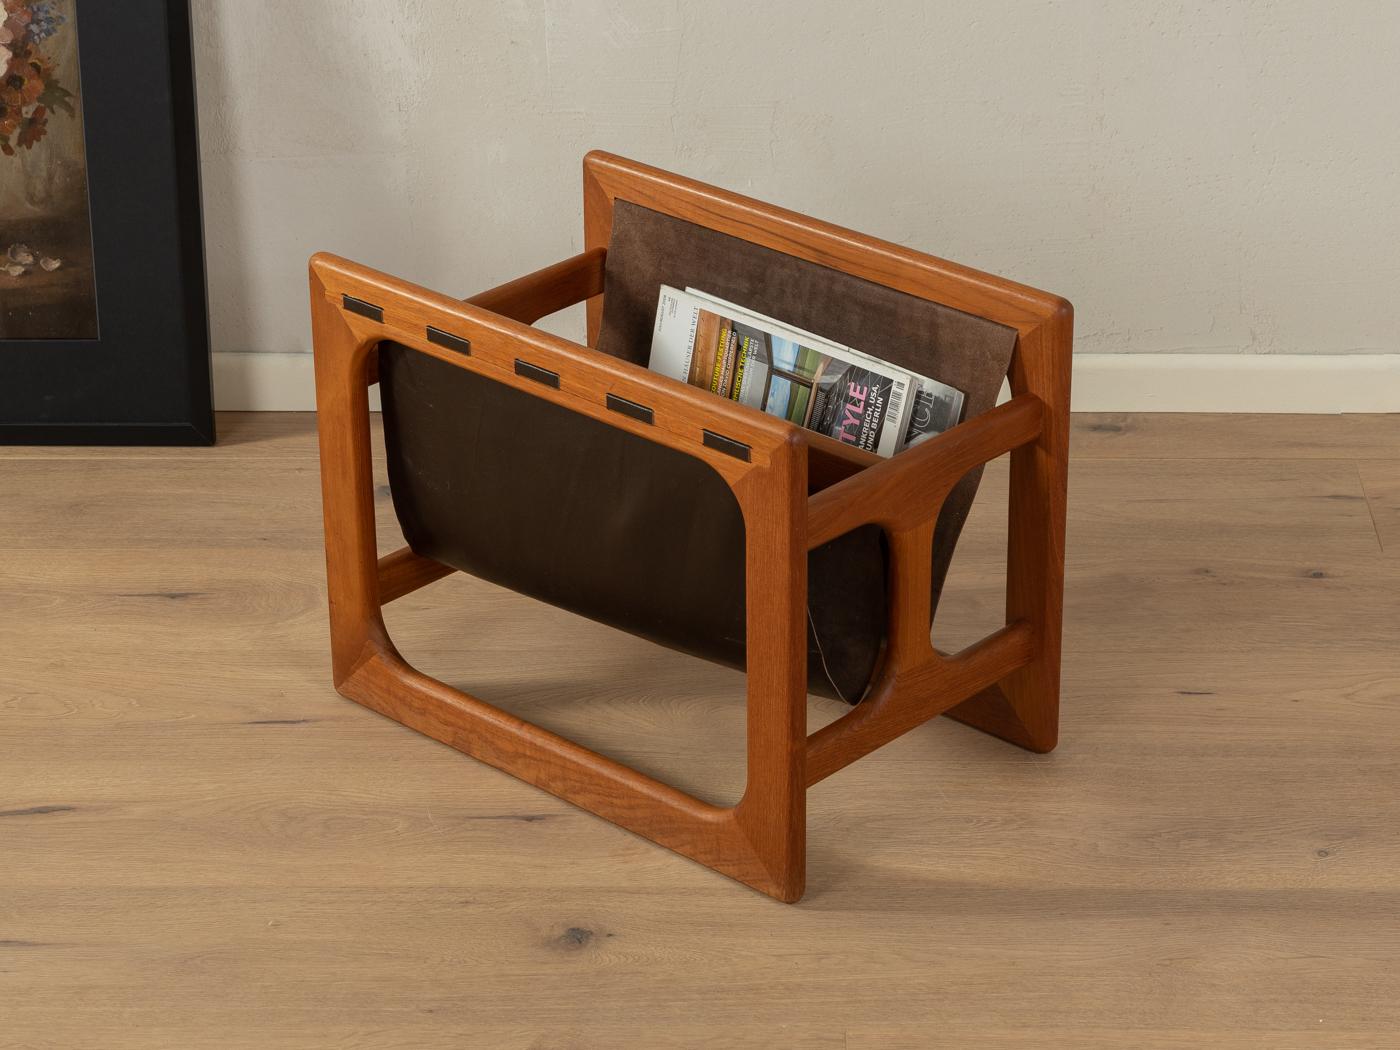 Classic magazine rack from the 1960s by Aksel Kjersgaard for Salin Møbler. High-quality solid teak frame with two suede magazine holders.
Quality Features:
accomplished design: perfect proportions and visible attention to detail
high-quality